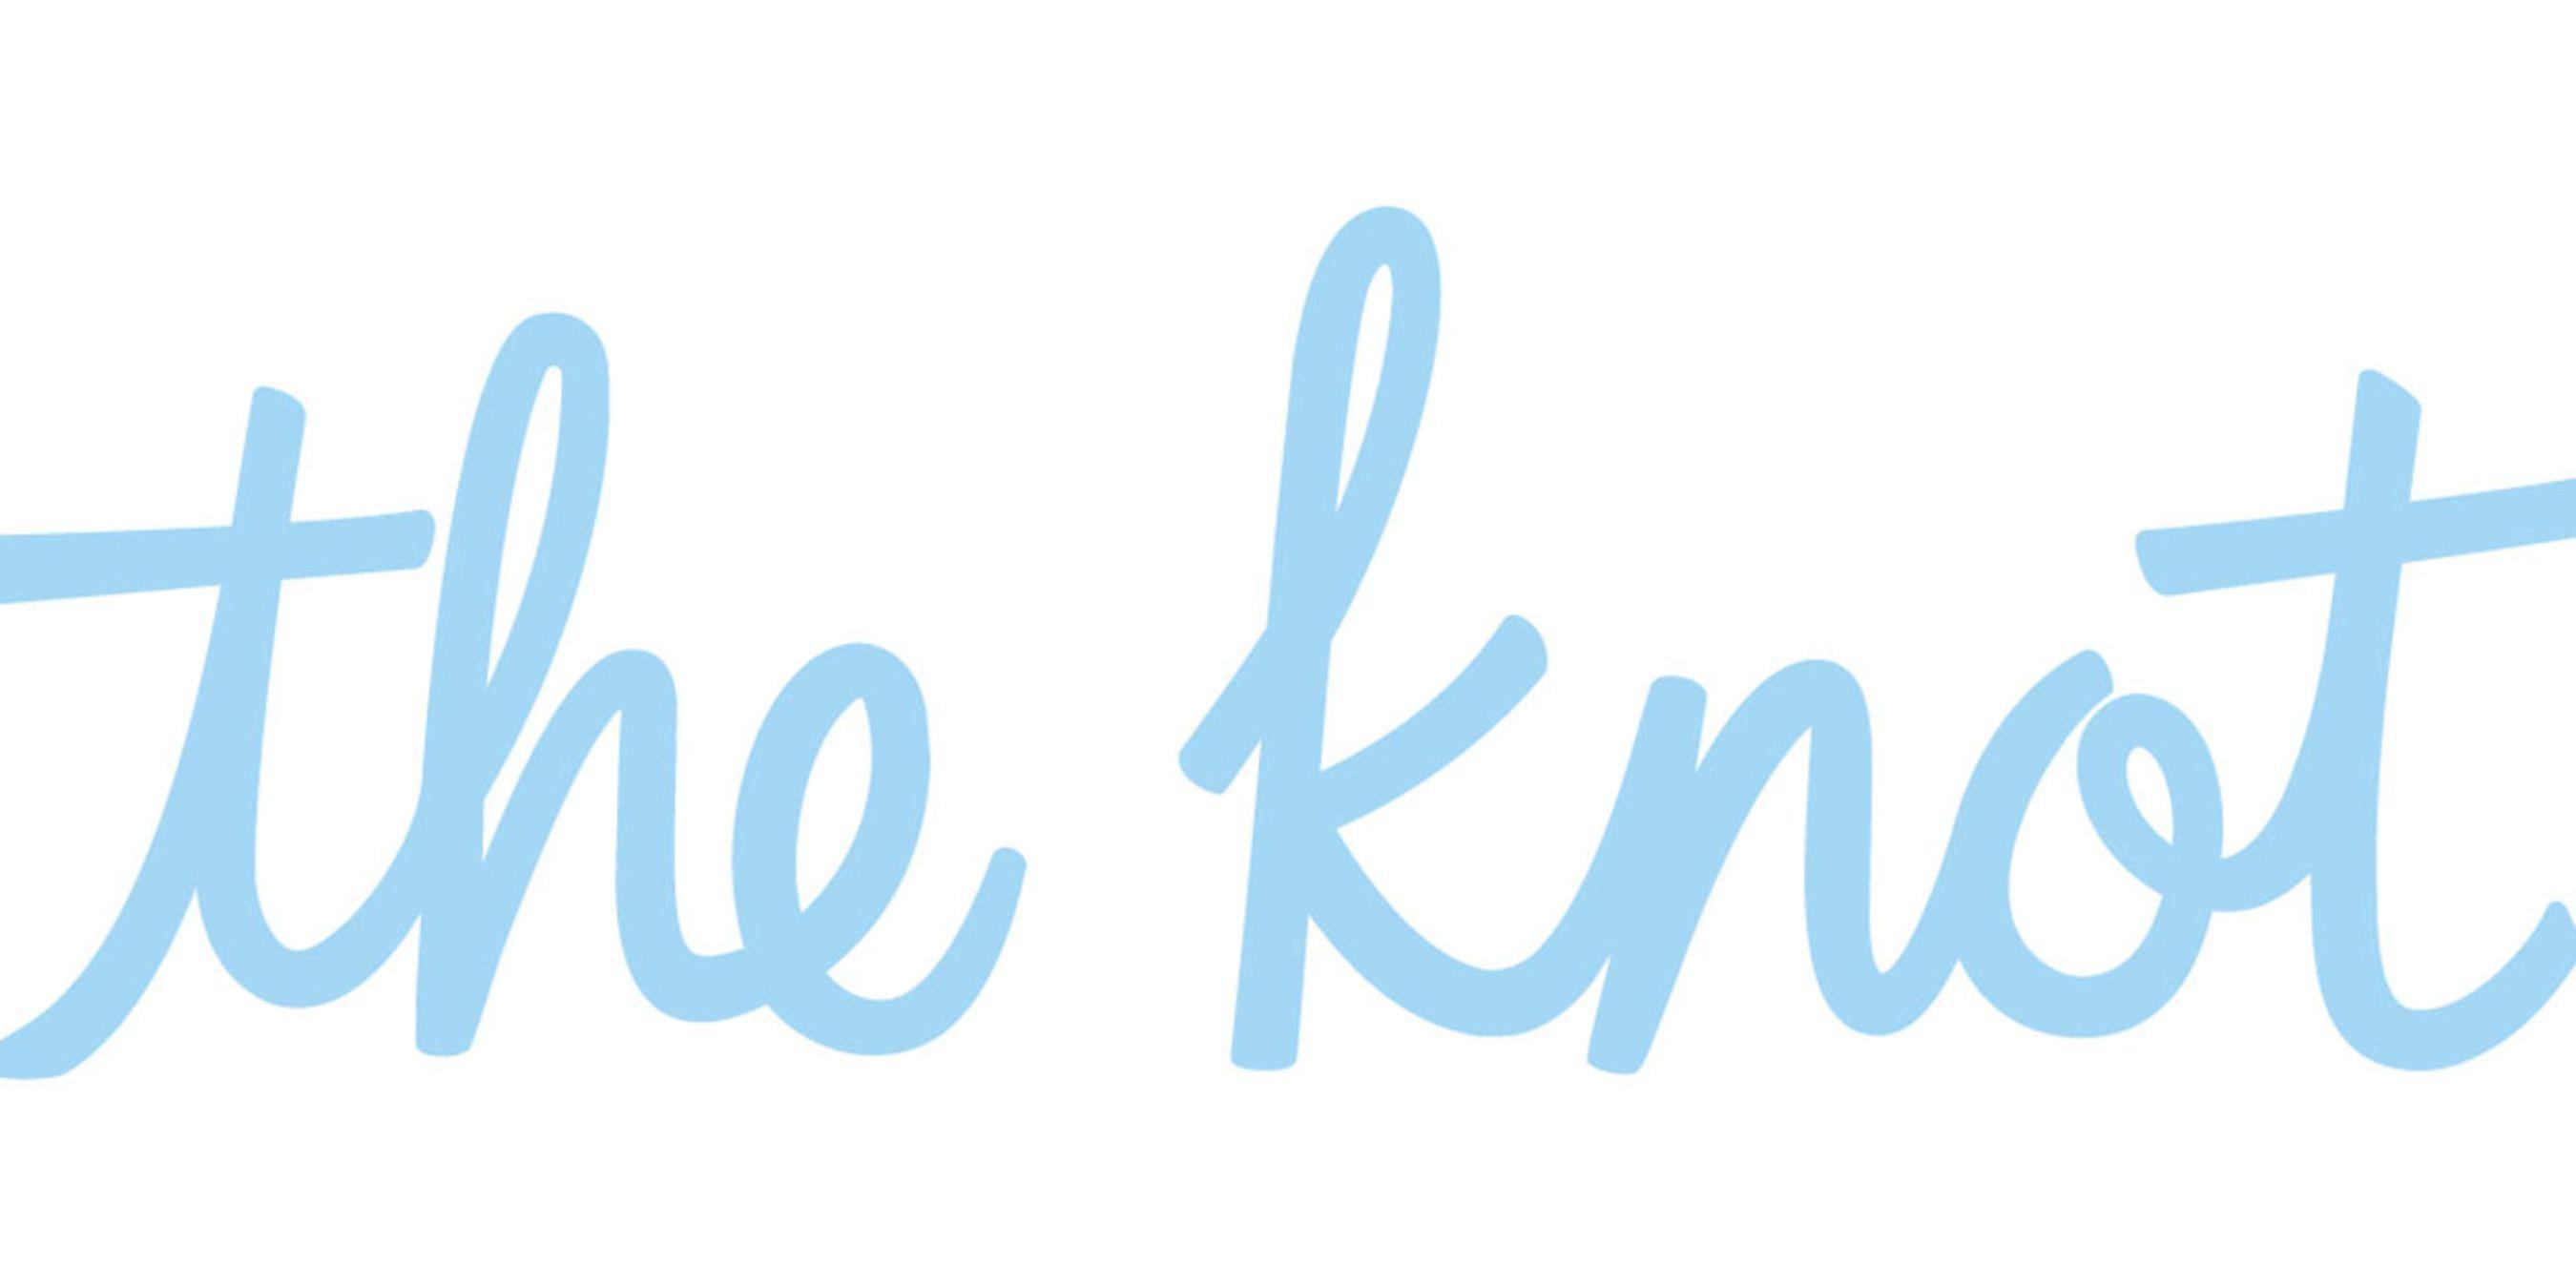 Theknot.com Logo - The Knot Provides Couples With Complimentary Wedding Concierge to